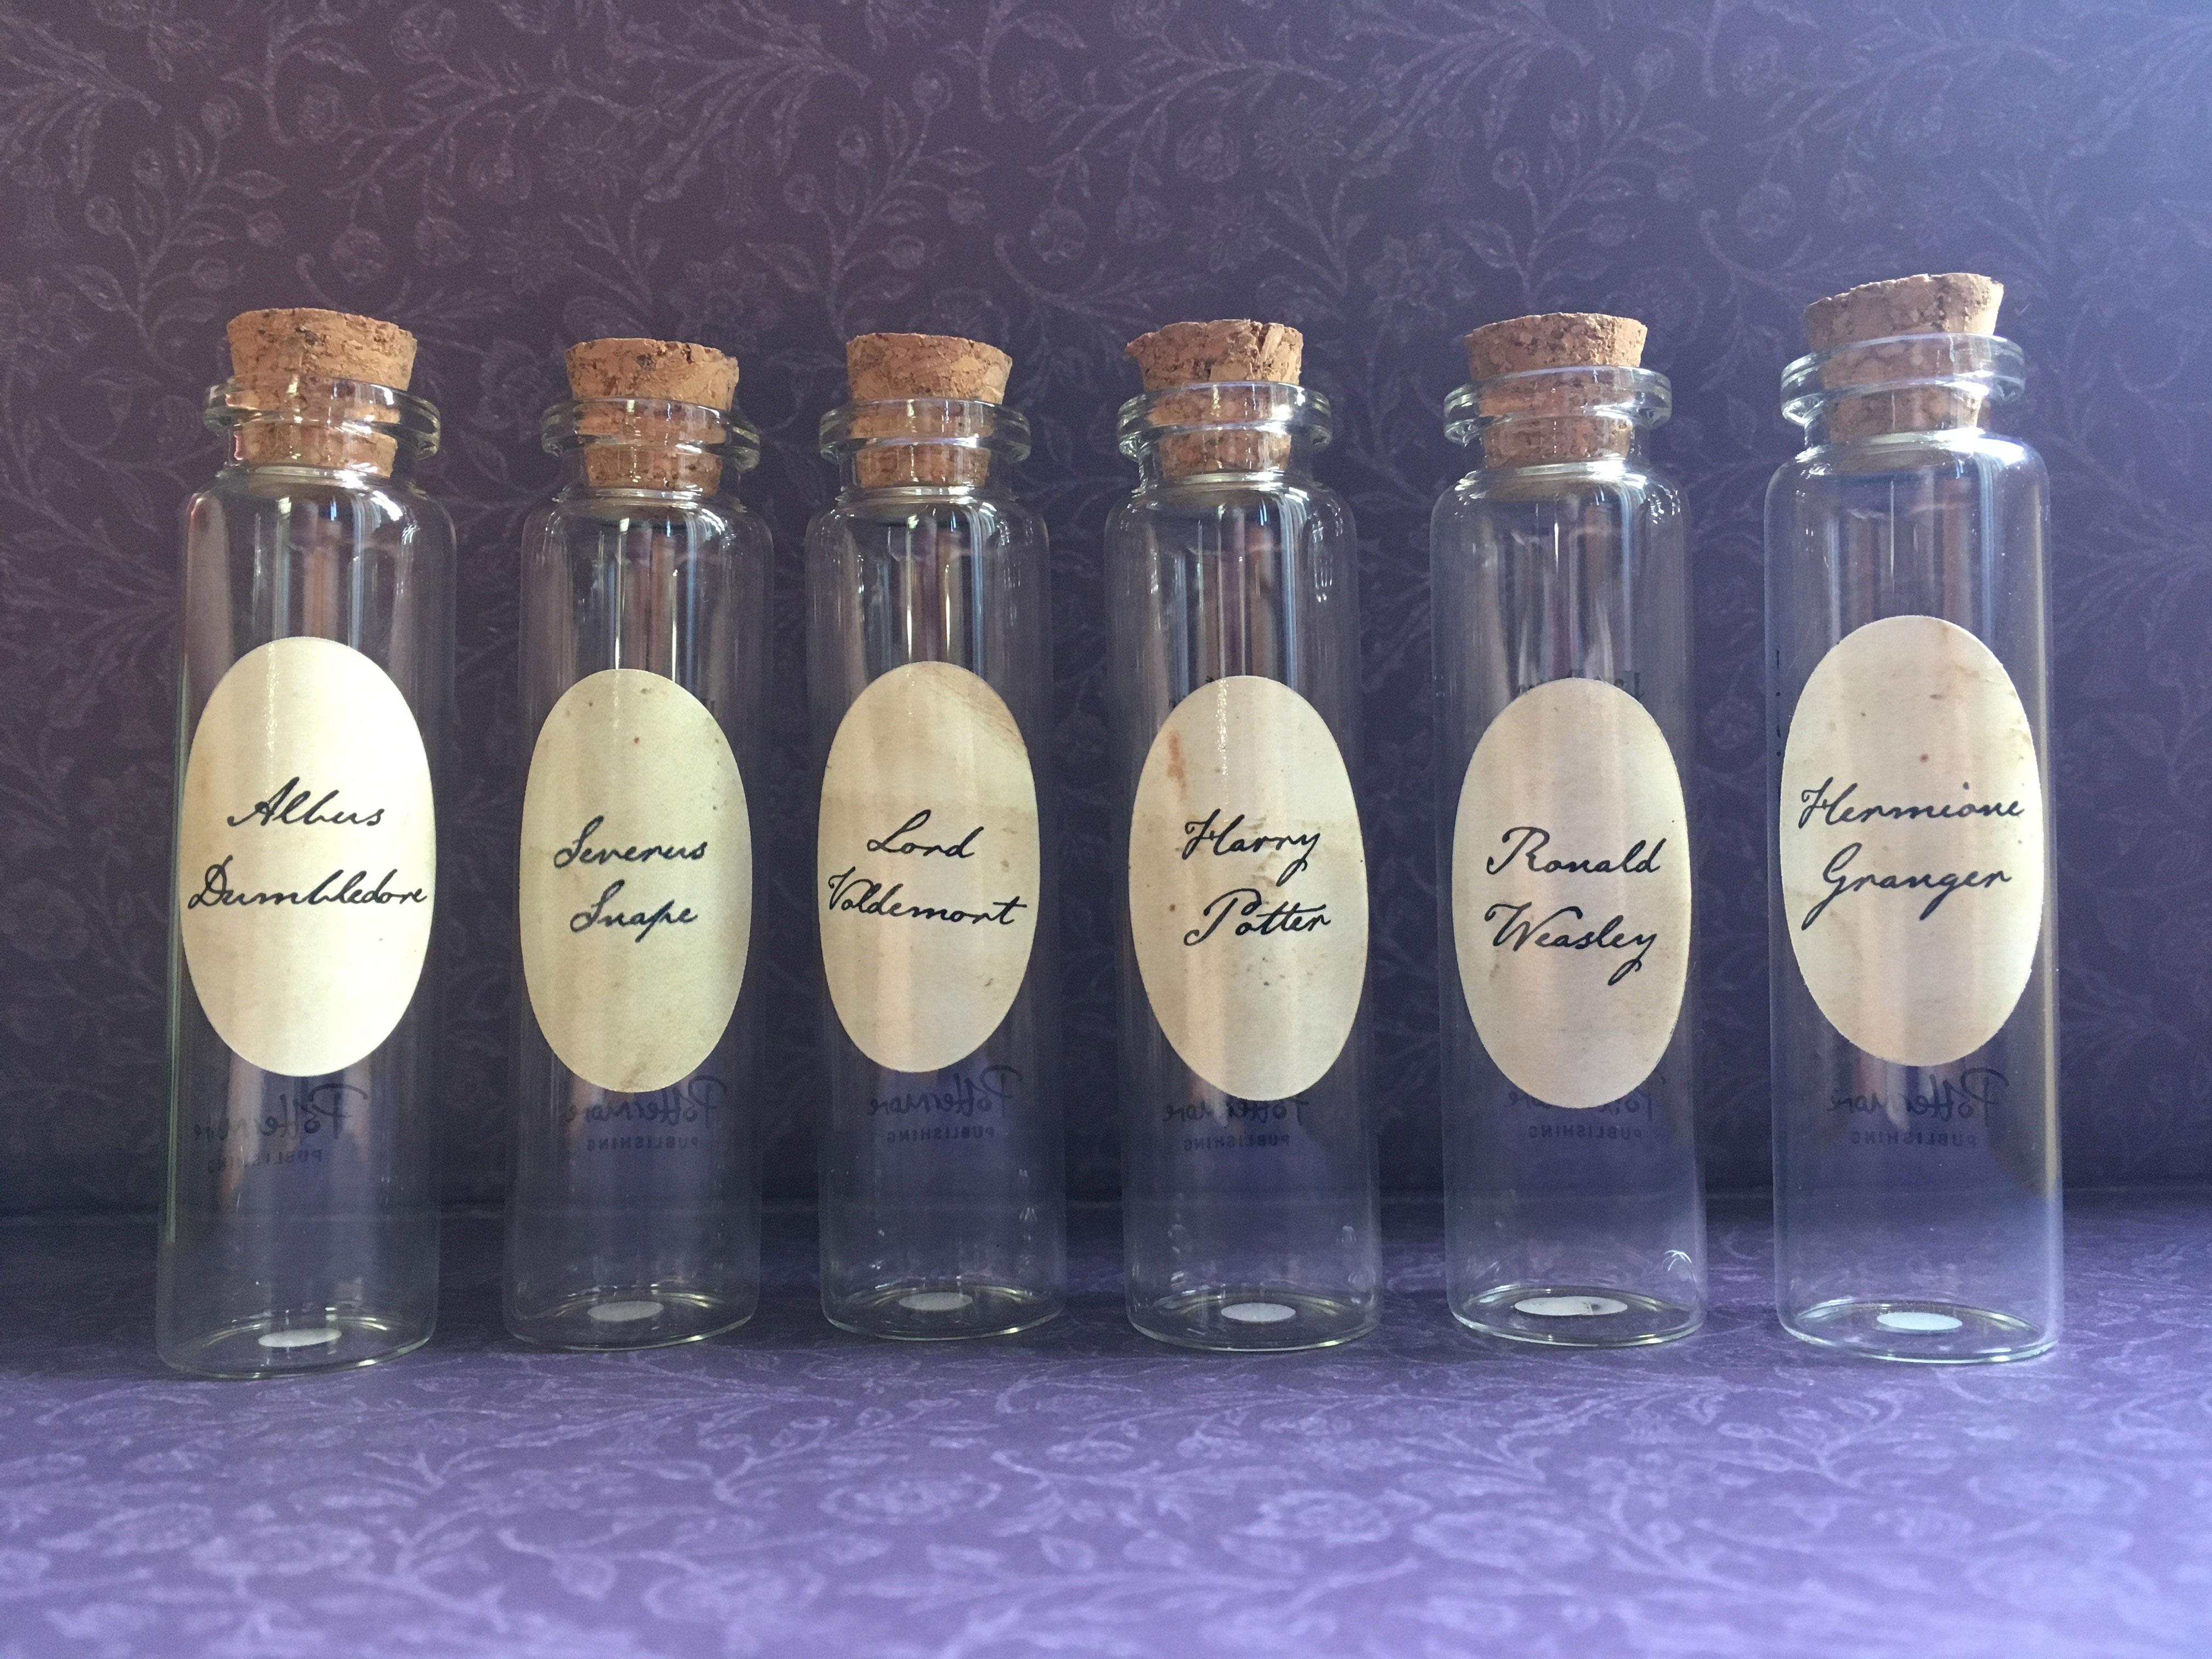 Pensieve vials from Audible’s “A Harry Potter Pensieve Experience,” featuring iconic characters Albus Dumbledore, Severus Snape, Lord Voldemort, Harry Potter, Ronald Weasley, and Hermione Granger